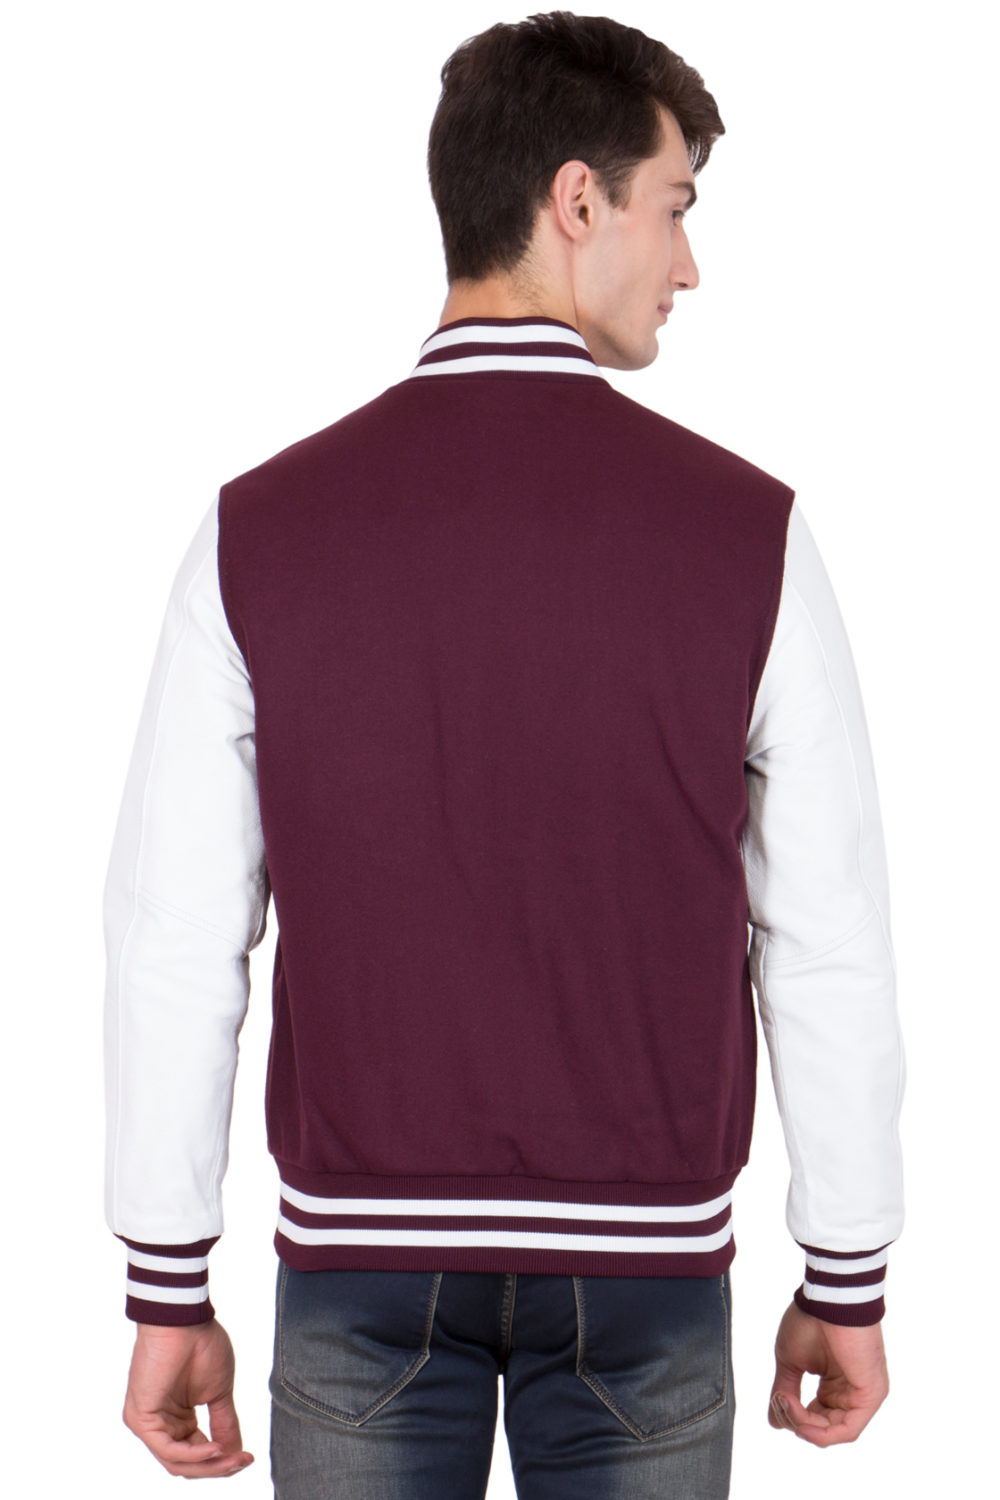 Letterman Jackets For Women | Special Offer up to 10% Discounts for ...